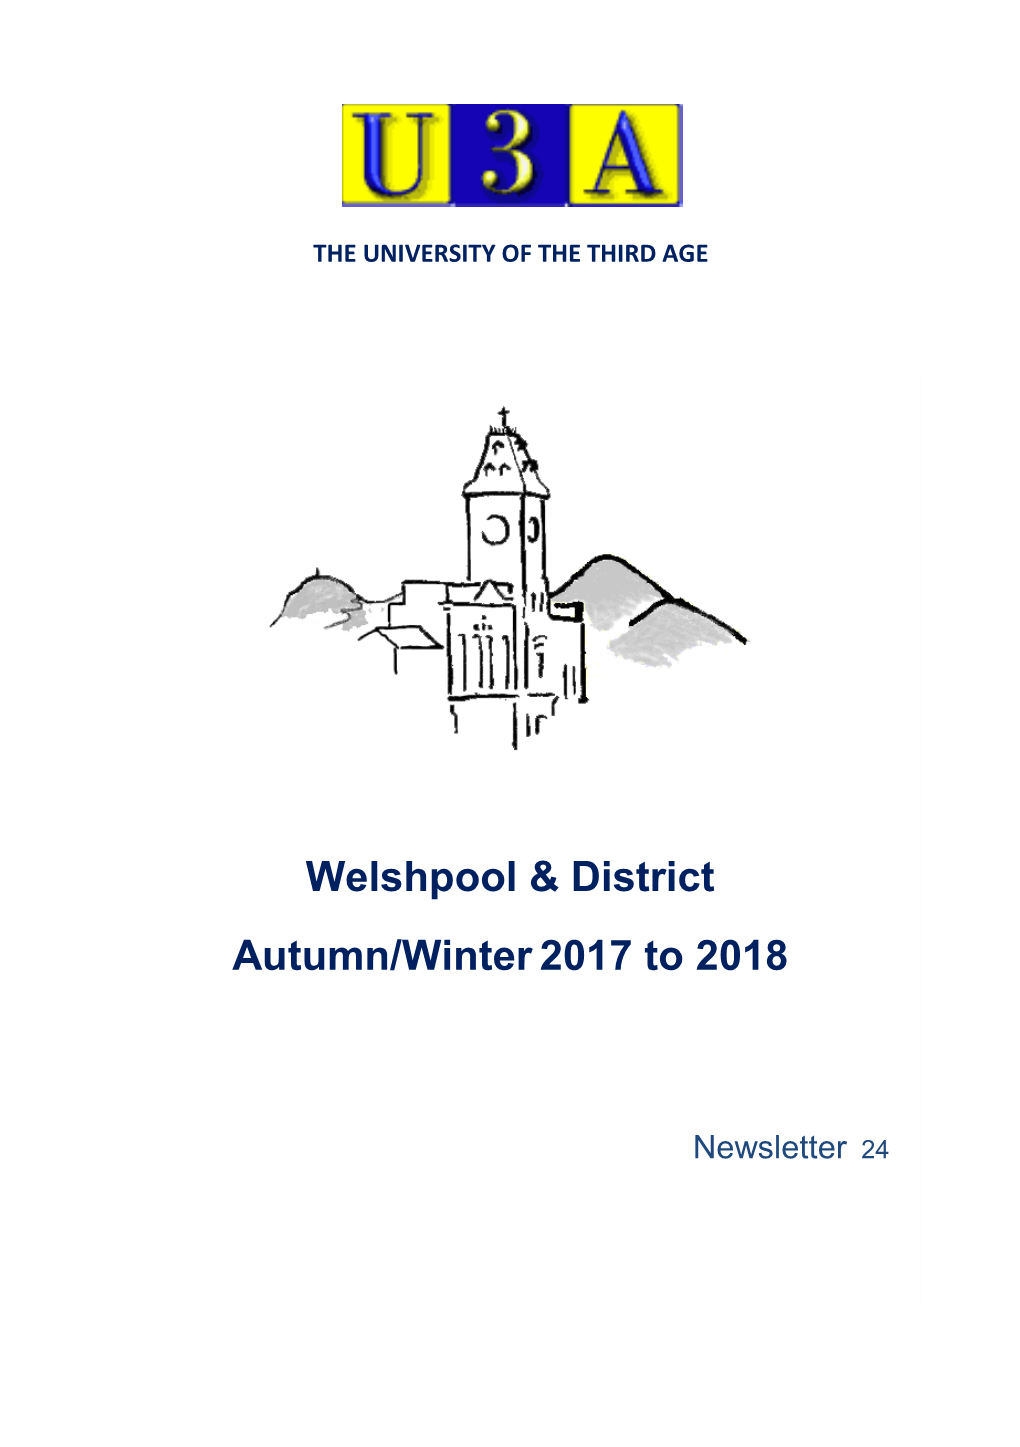 Welshpool & District Autumn/Winter2017 to 2018